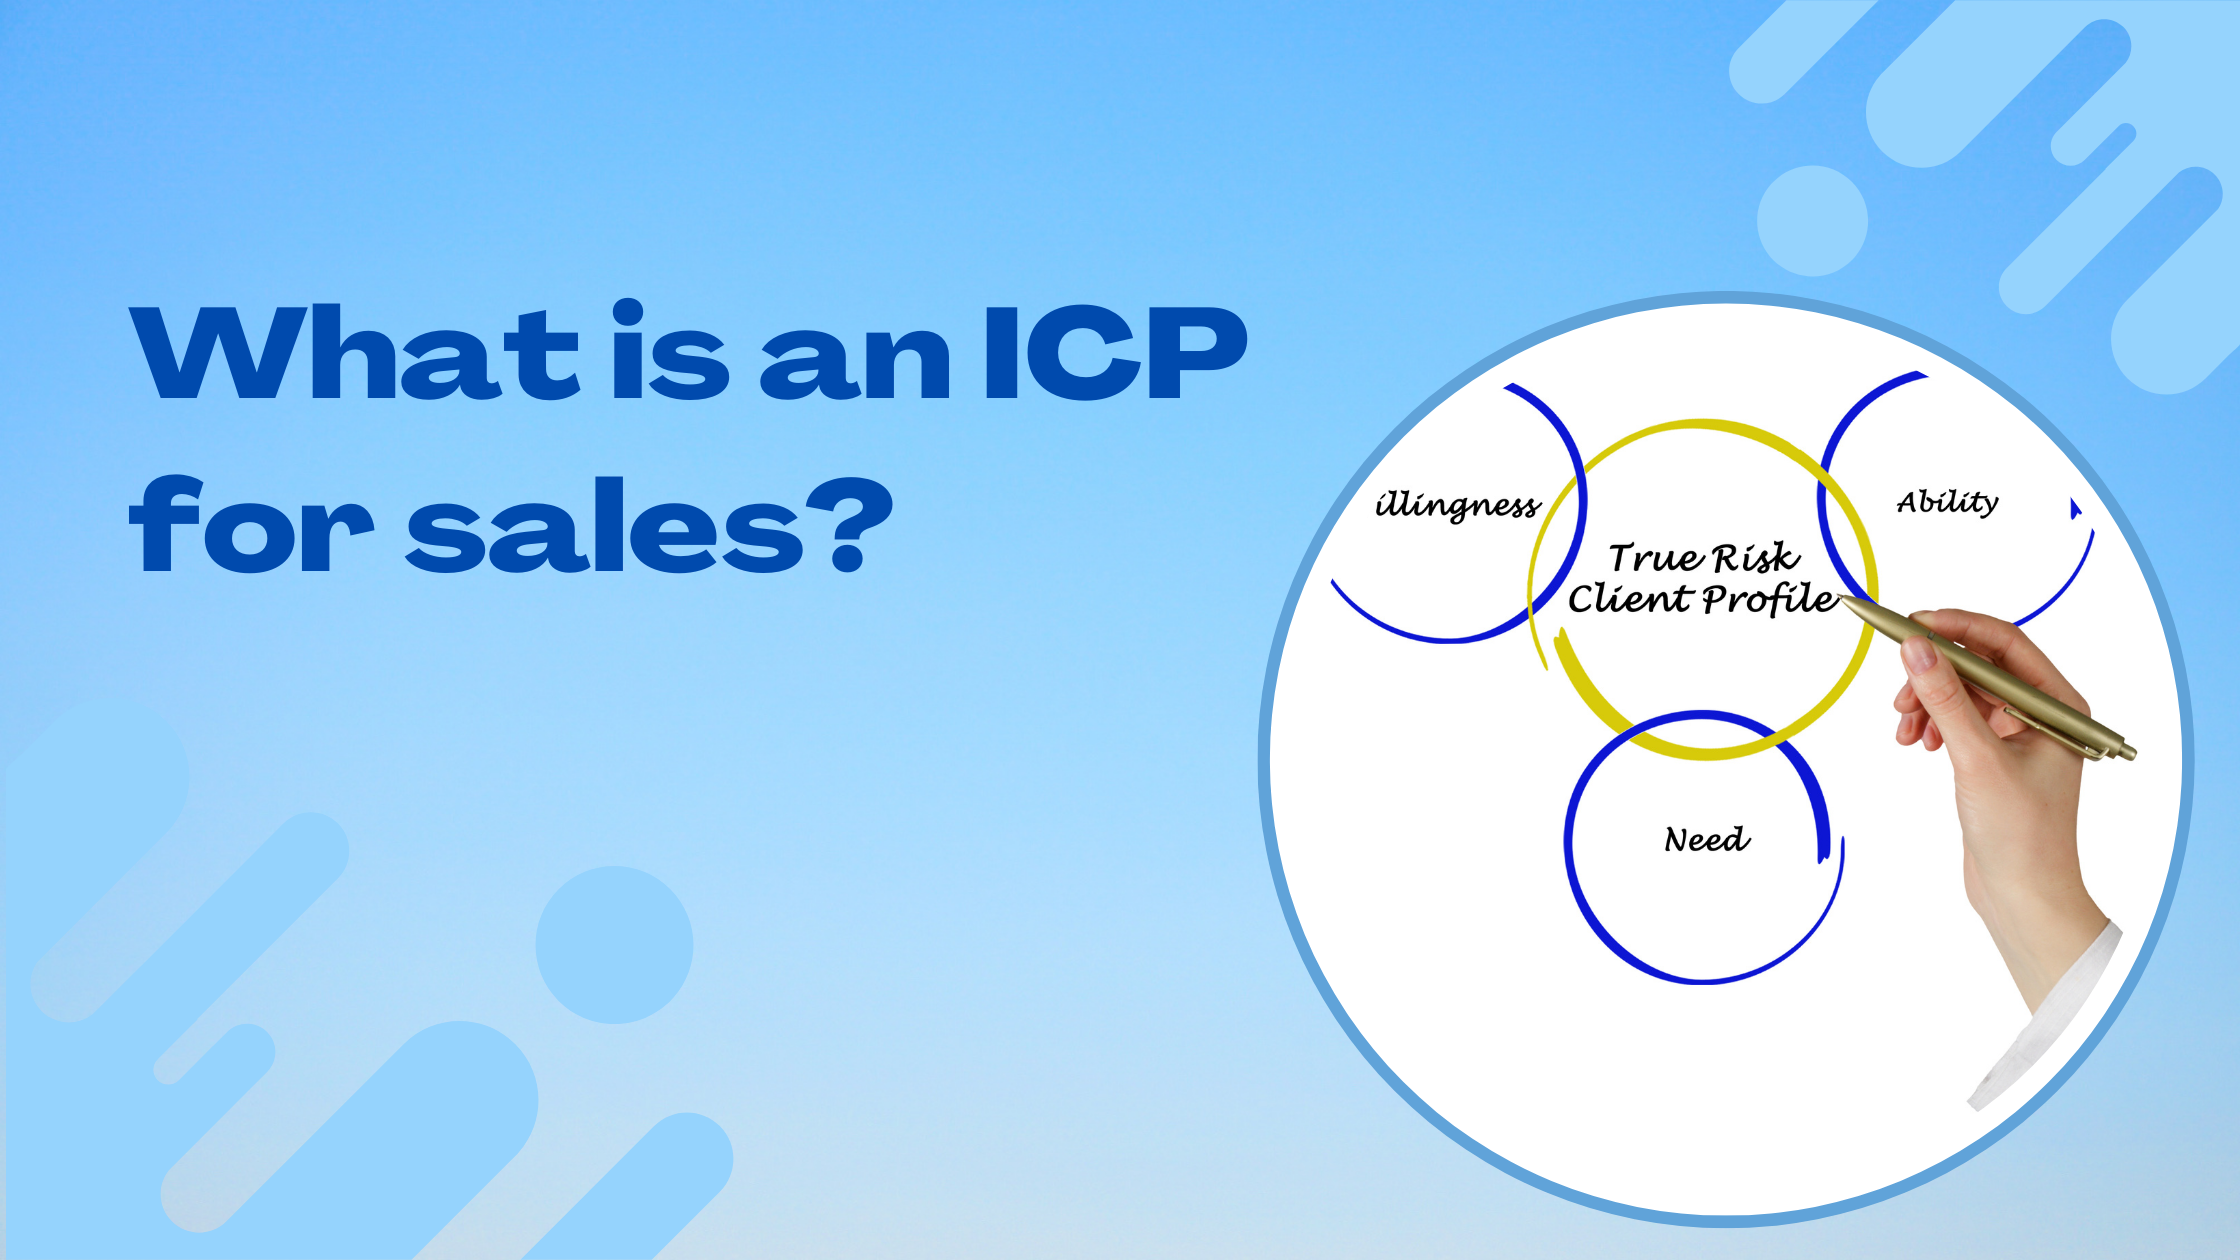 What is an ICP for sales?